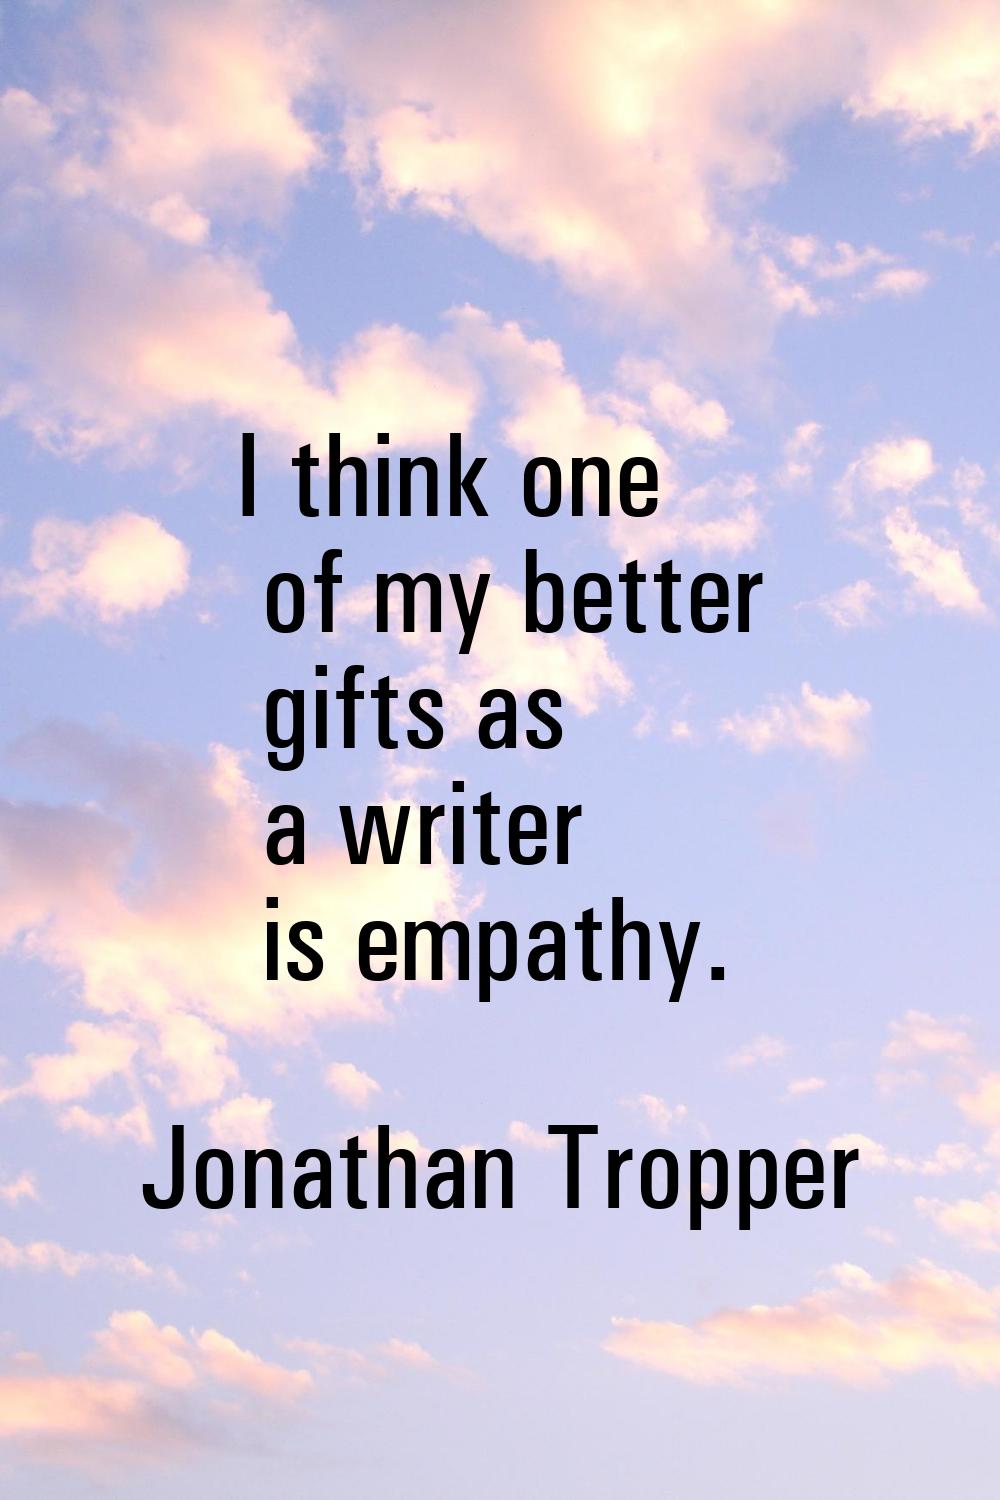 I think one of my better gifts as a writer is empathy.